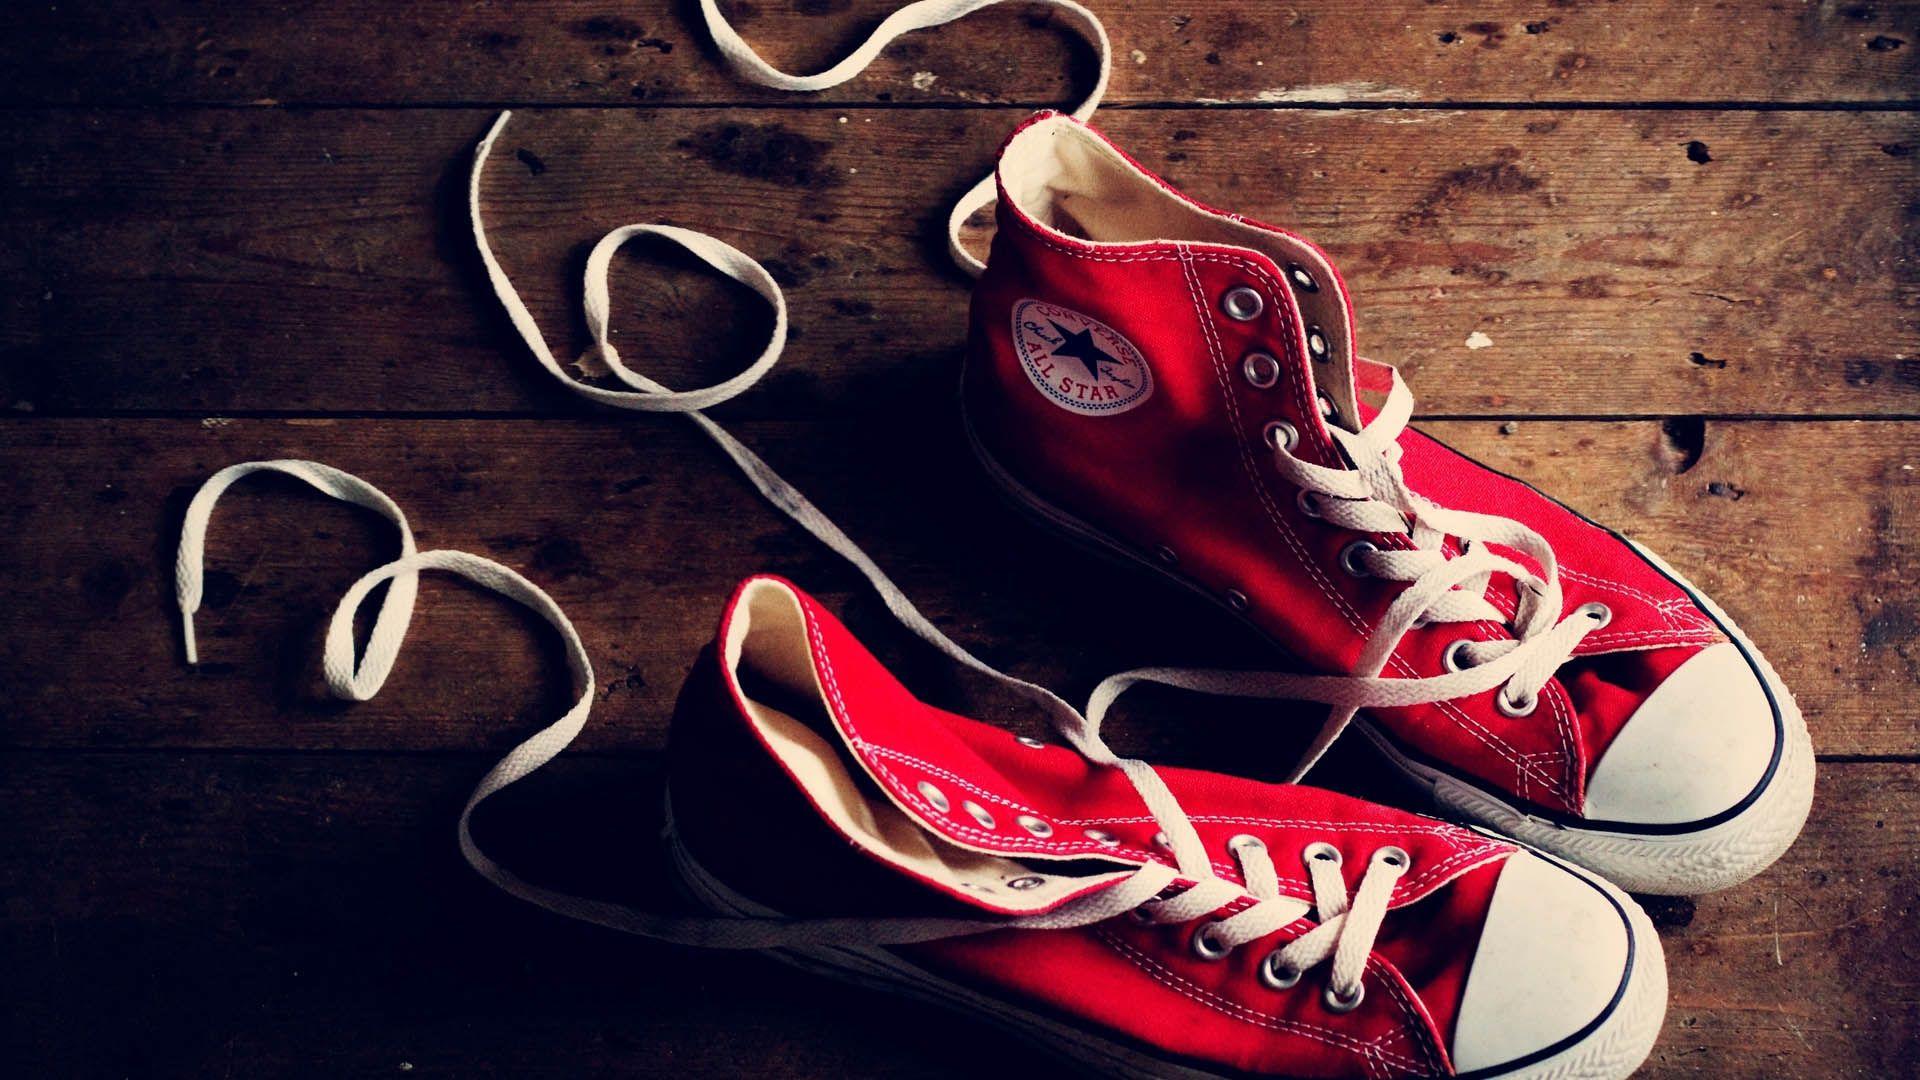 Download Converse Shoes All Star Hd Wallpapers